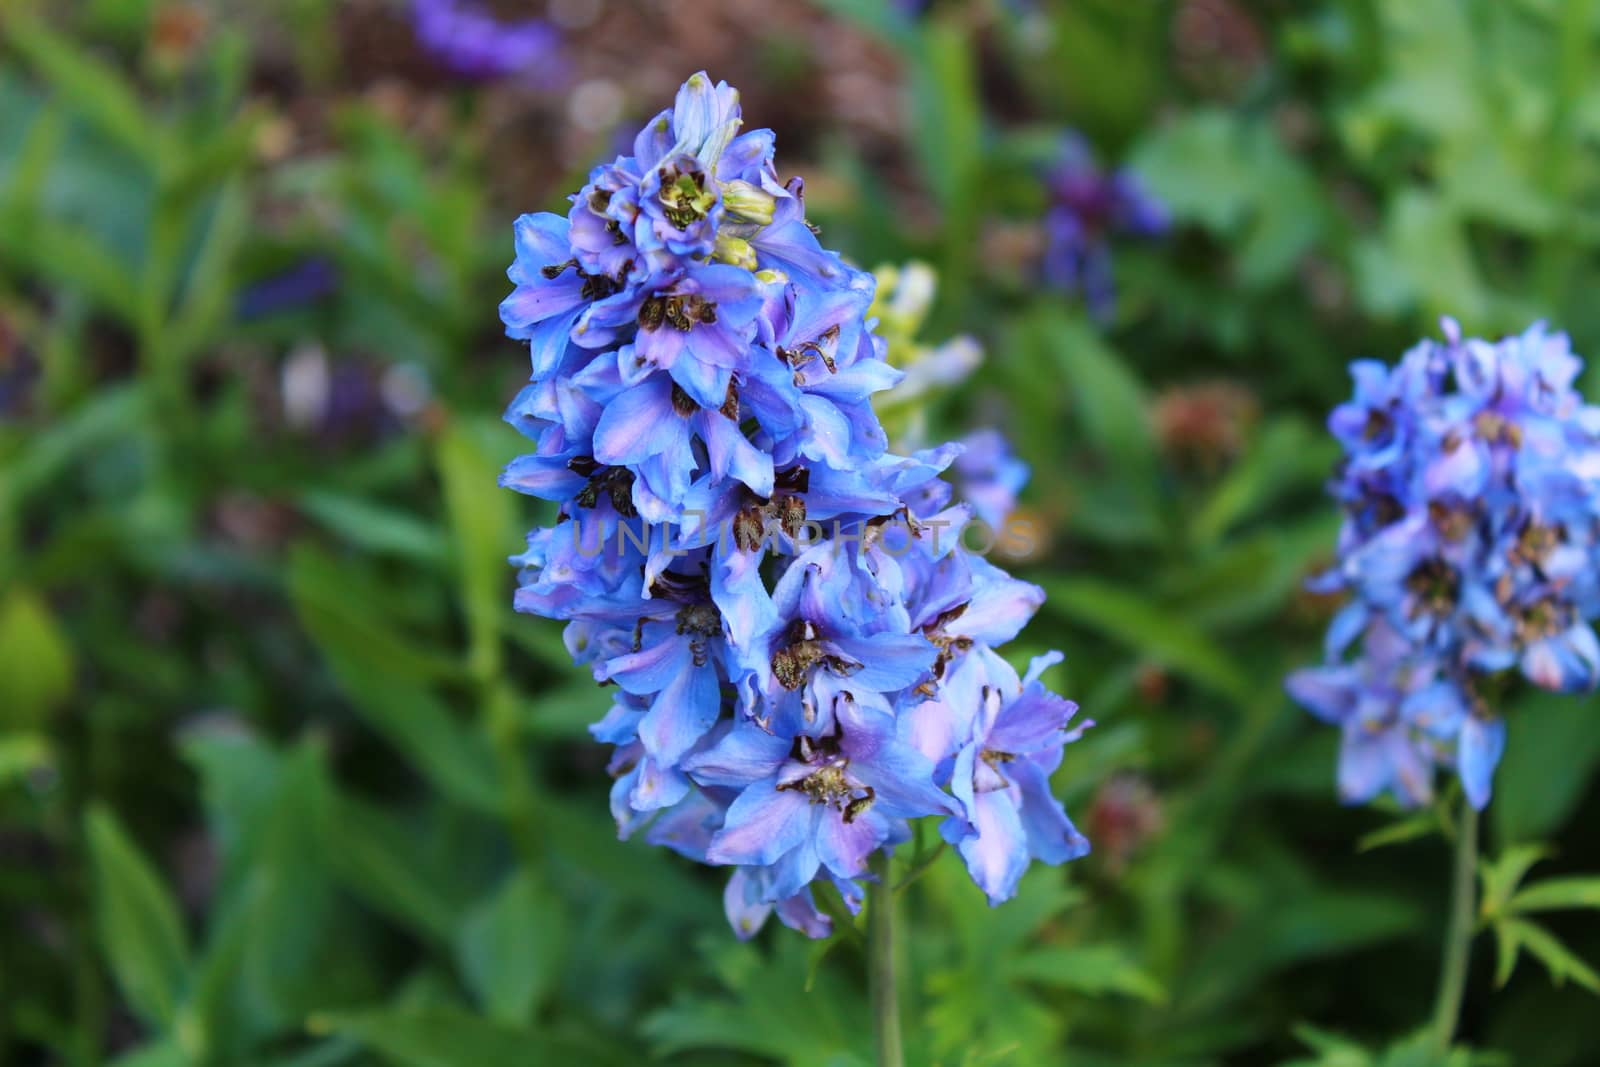 The picture shows blue larkspur in the garden